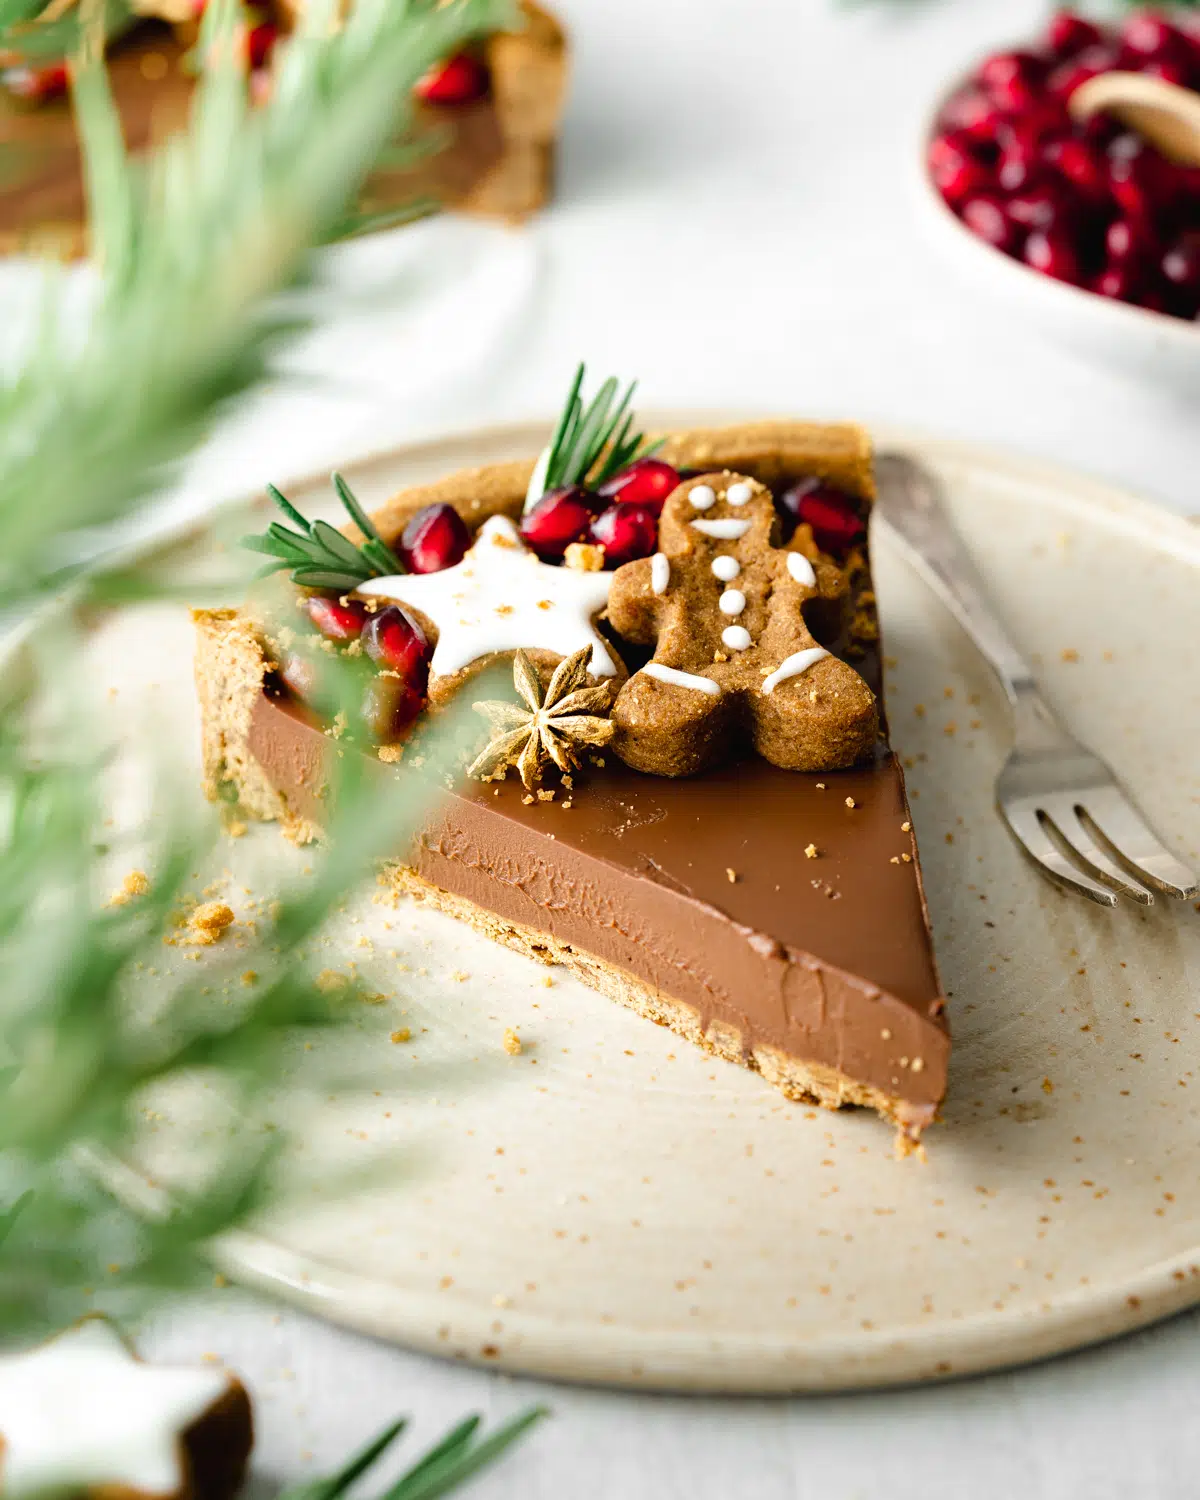 chocolate tart with gingerbread and evergreen leaves in the foreground.